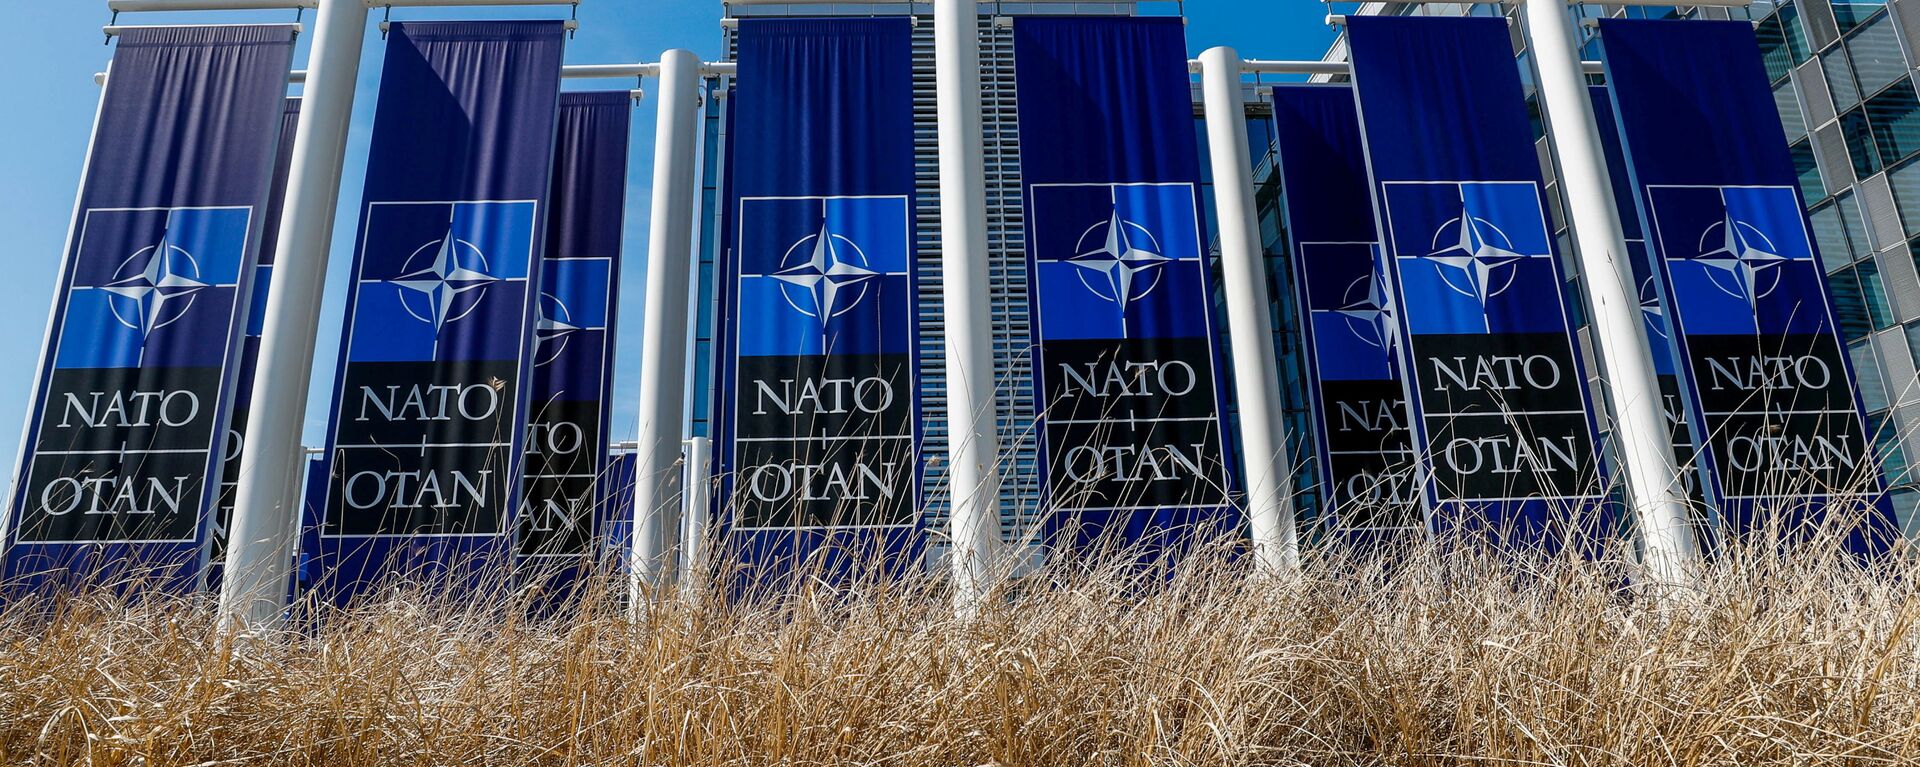 FILE PHOTO: Banners displaying the NATO logo are placed at the entrance of new NATO headquarters during the move to the new building, in Brussels, Belgium April 19, 2018.  REUTERS/Yves Herman/File Photo - Sputnik International, 1920, 06.09.2021